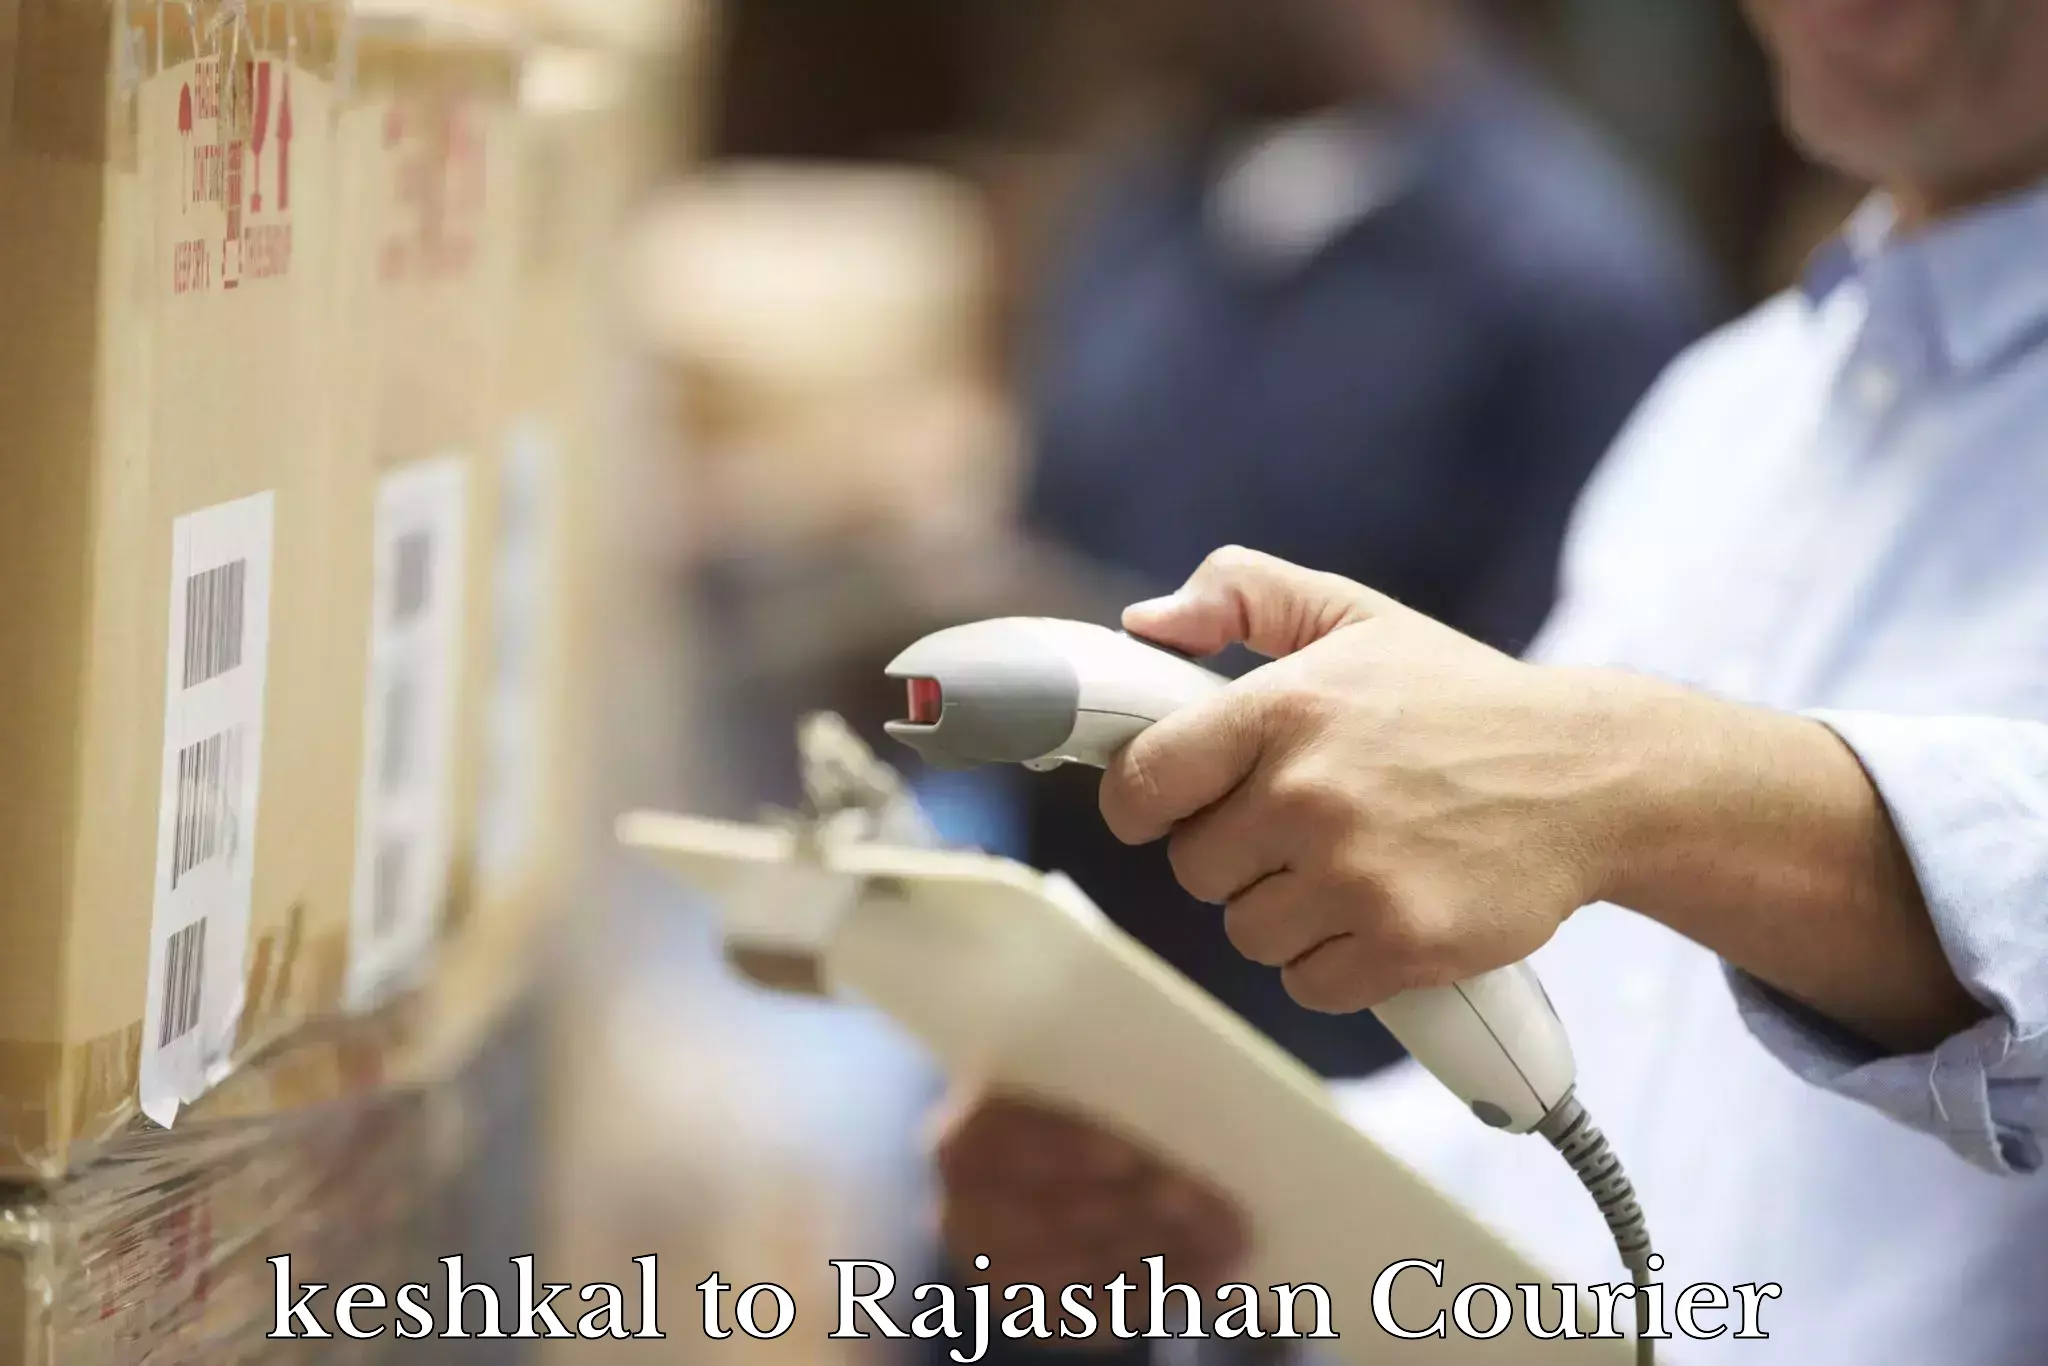 Parcel service for businesses keshkal to Sultana